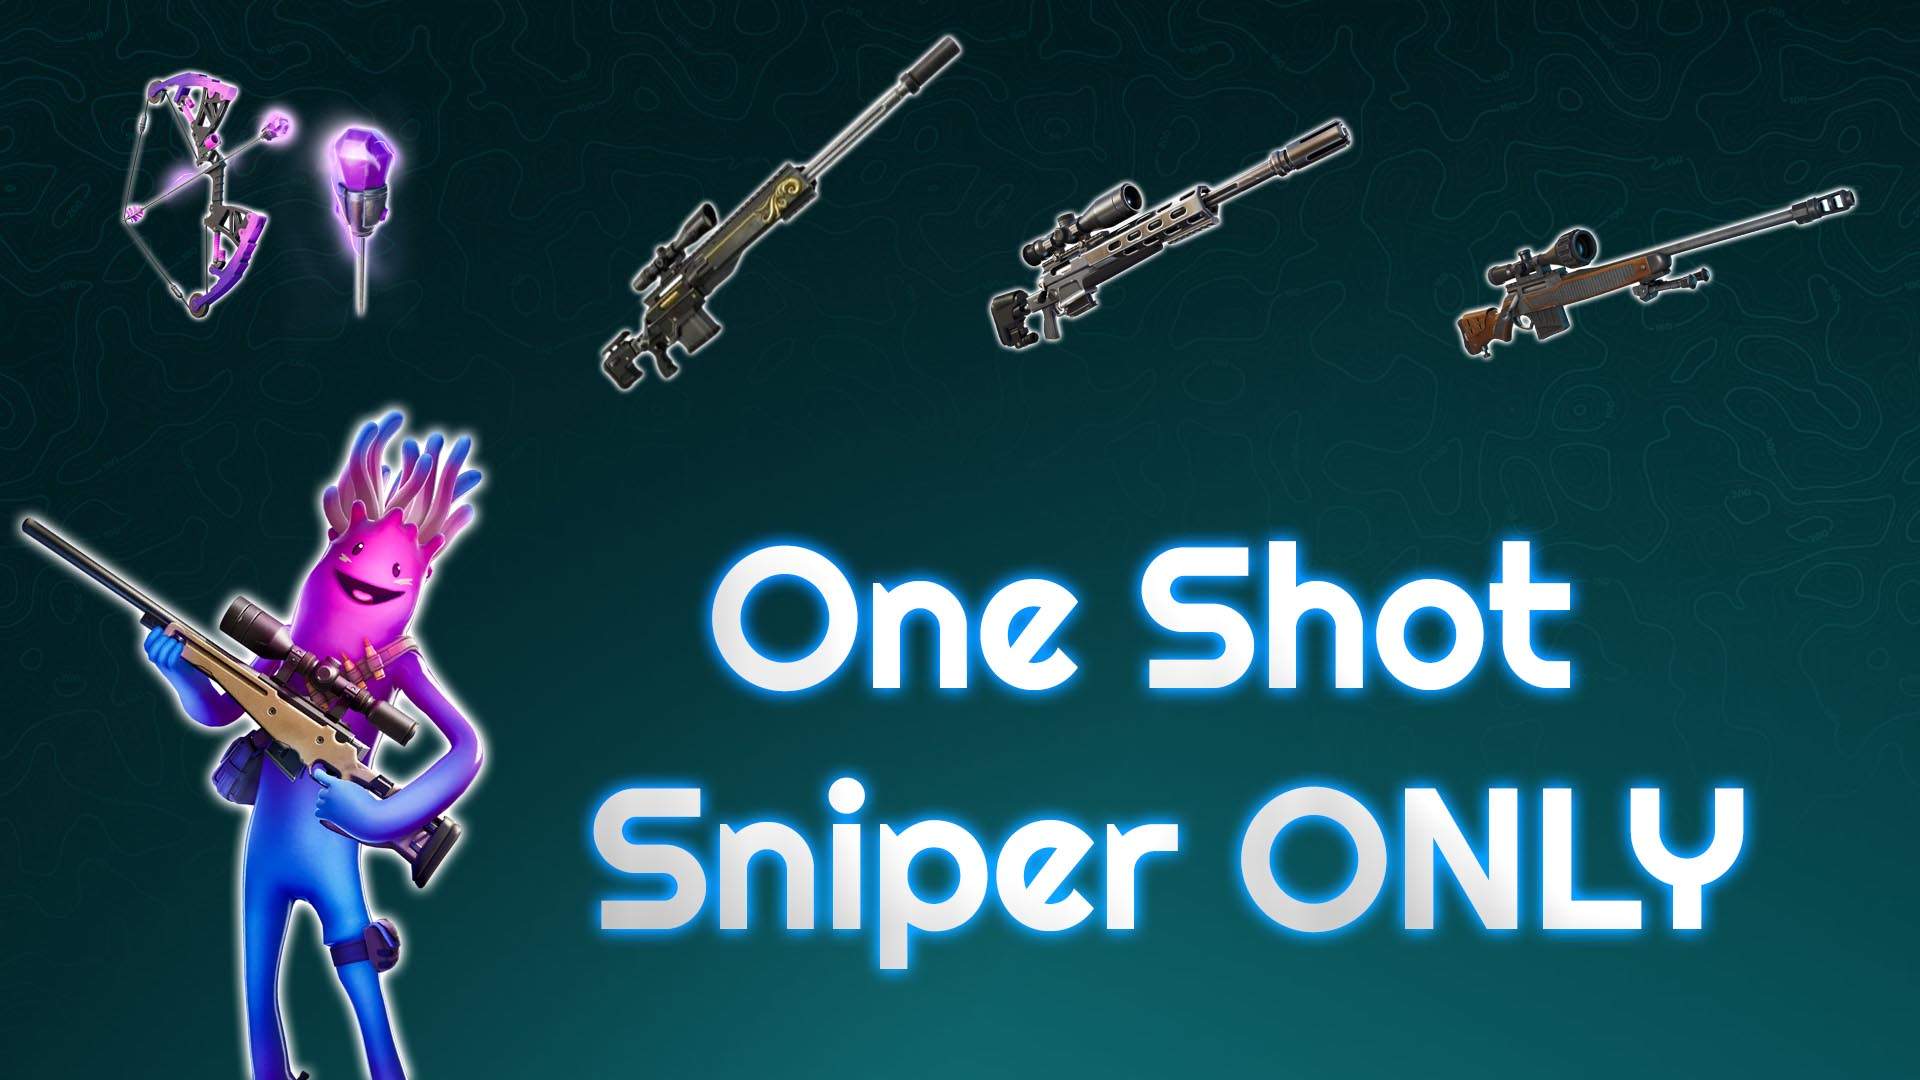 One Shot Sniper ONLY🎯